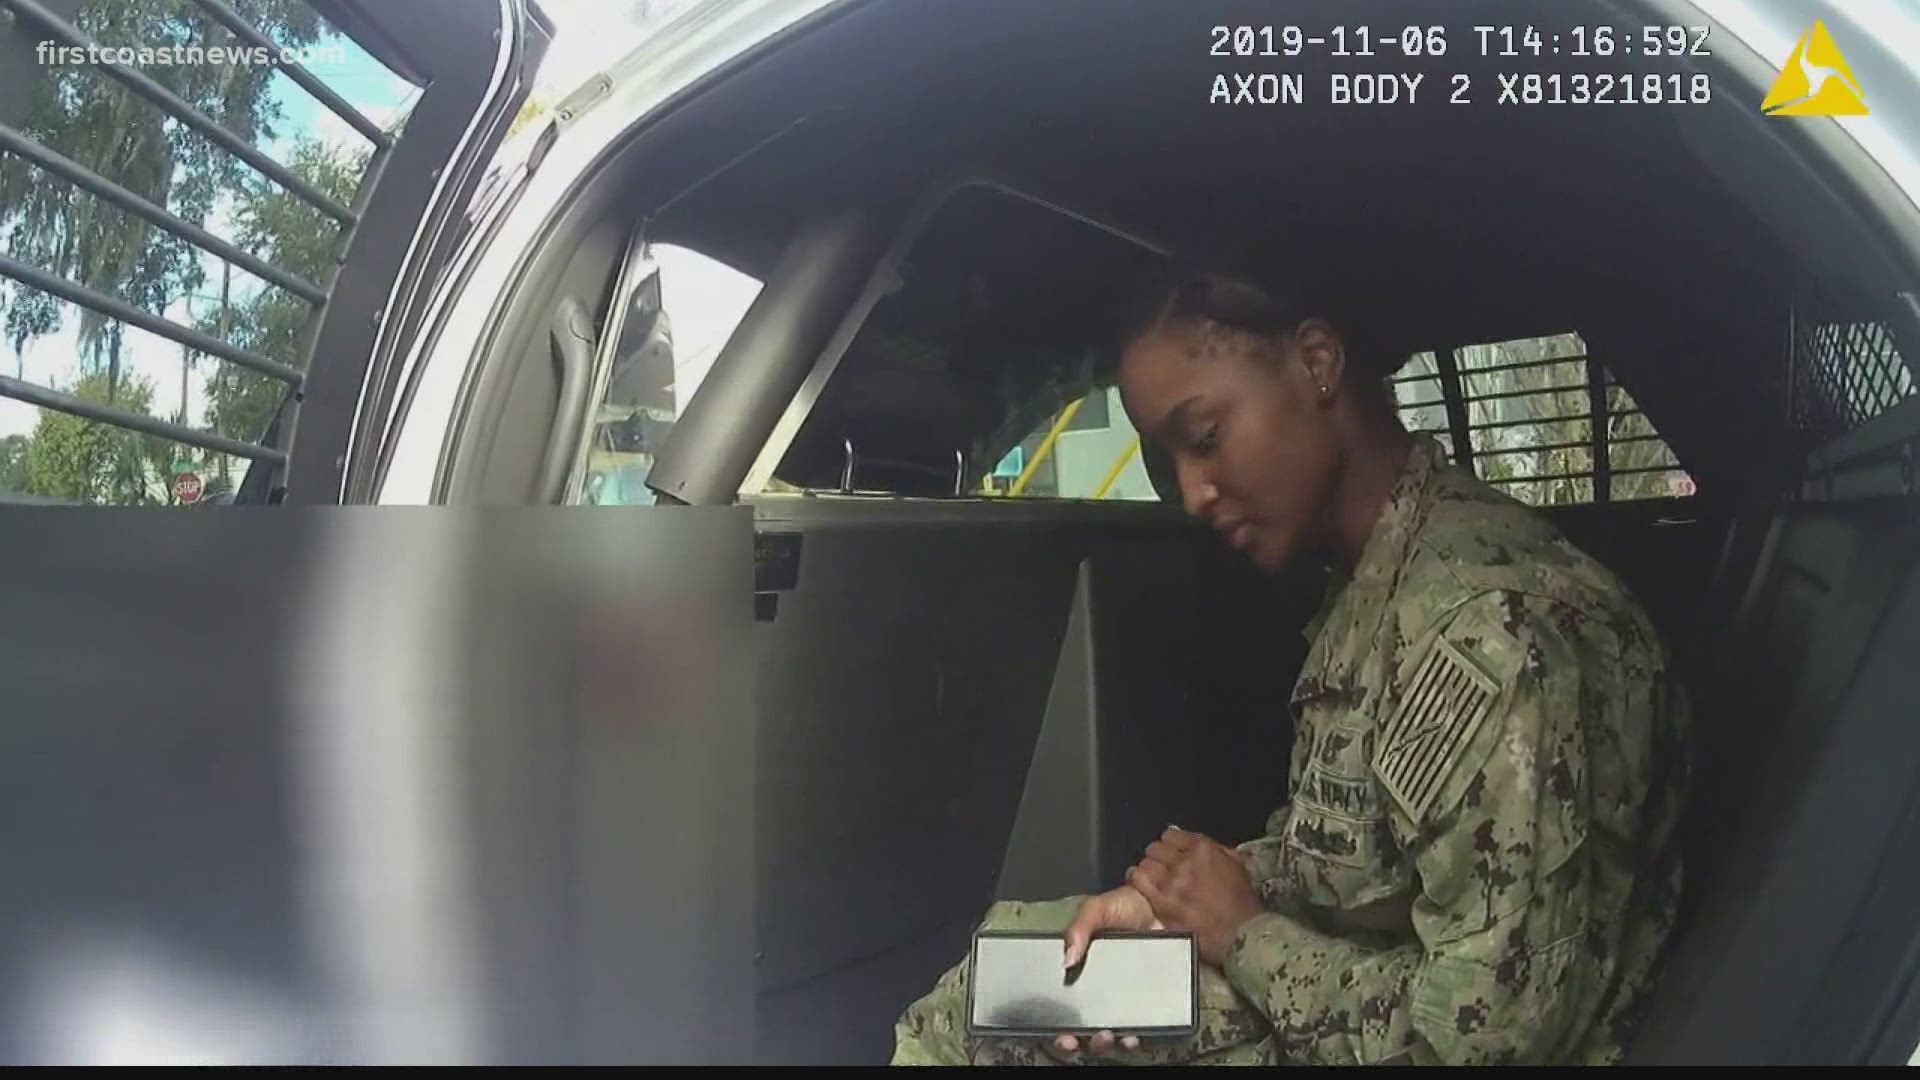 The video shows Taylor Williams' mother Brianna being interviewed in the back of a police car as officers were doing a door-to-door search for the 5-year-old girl.